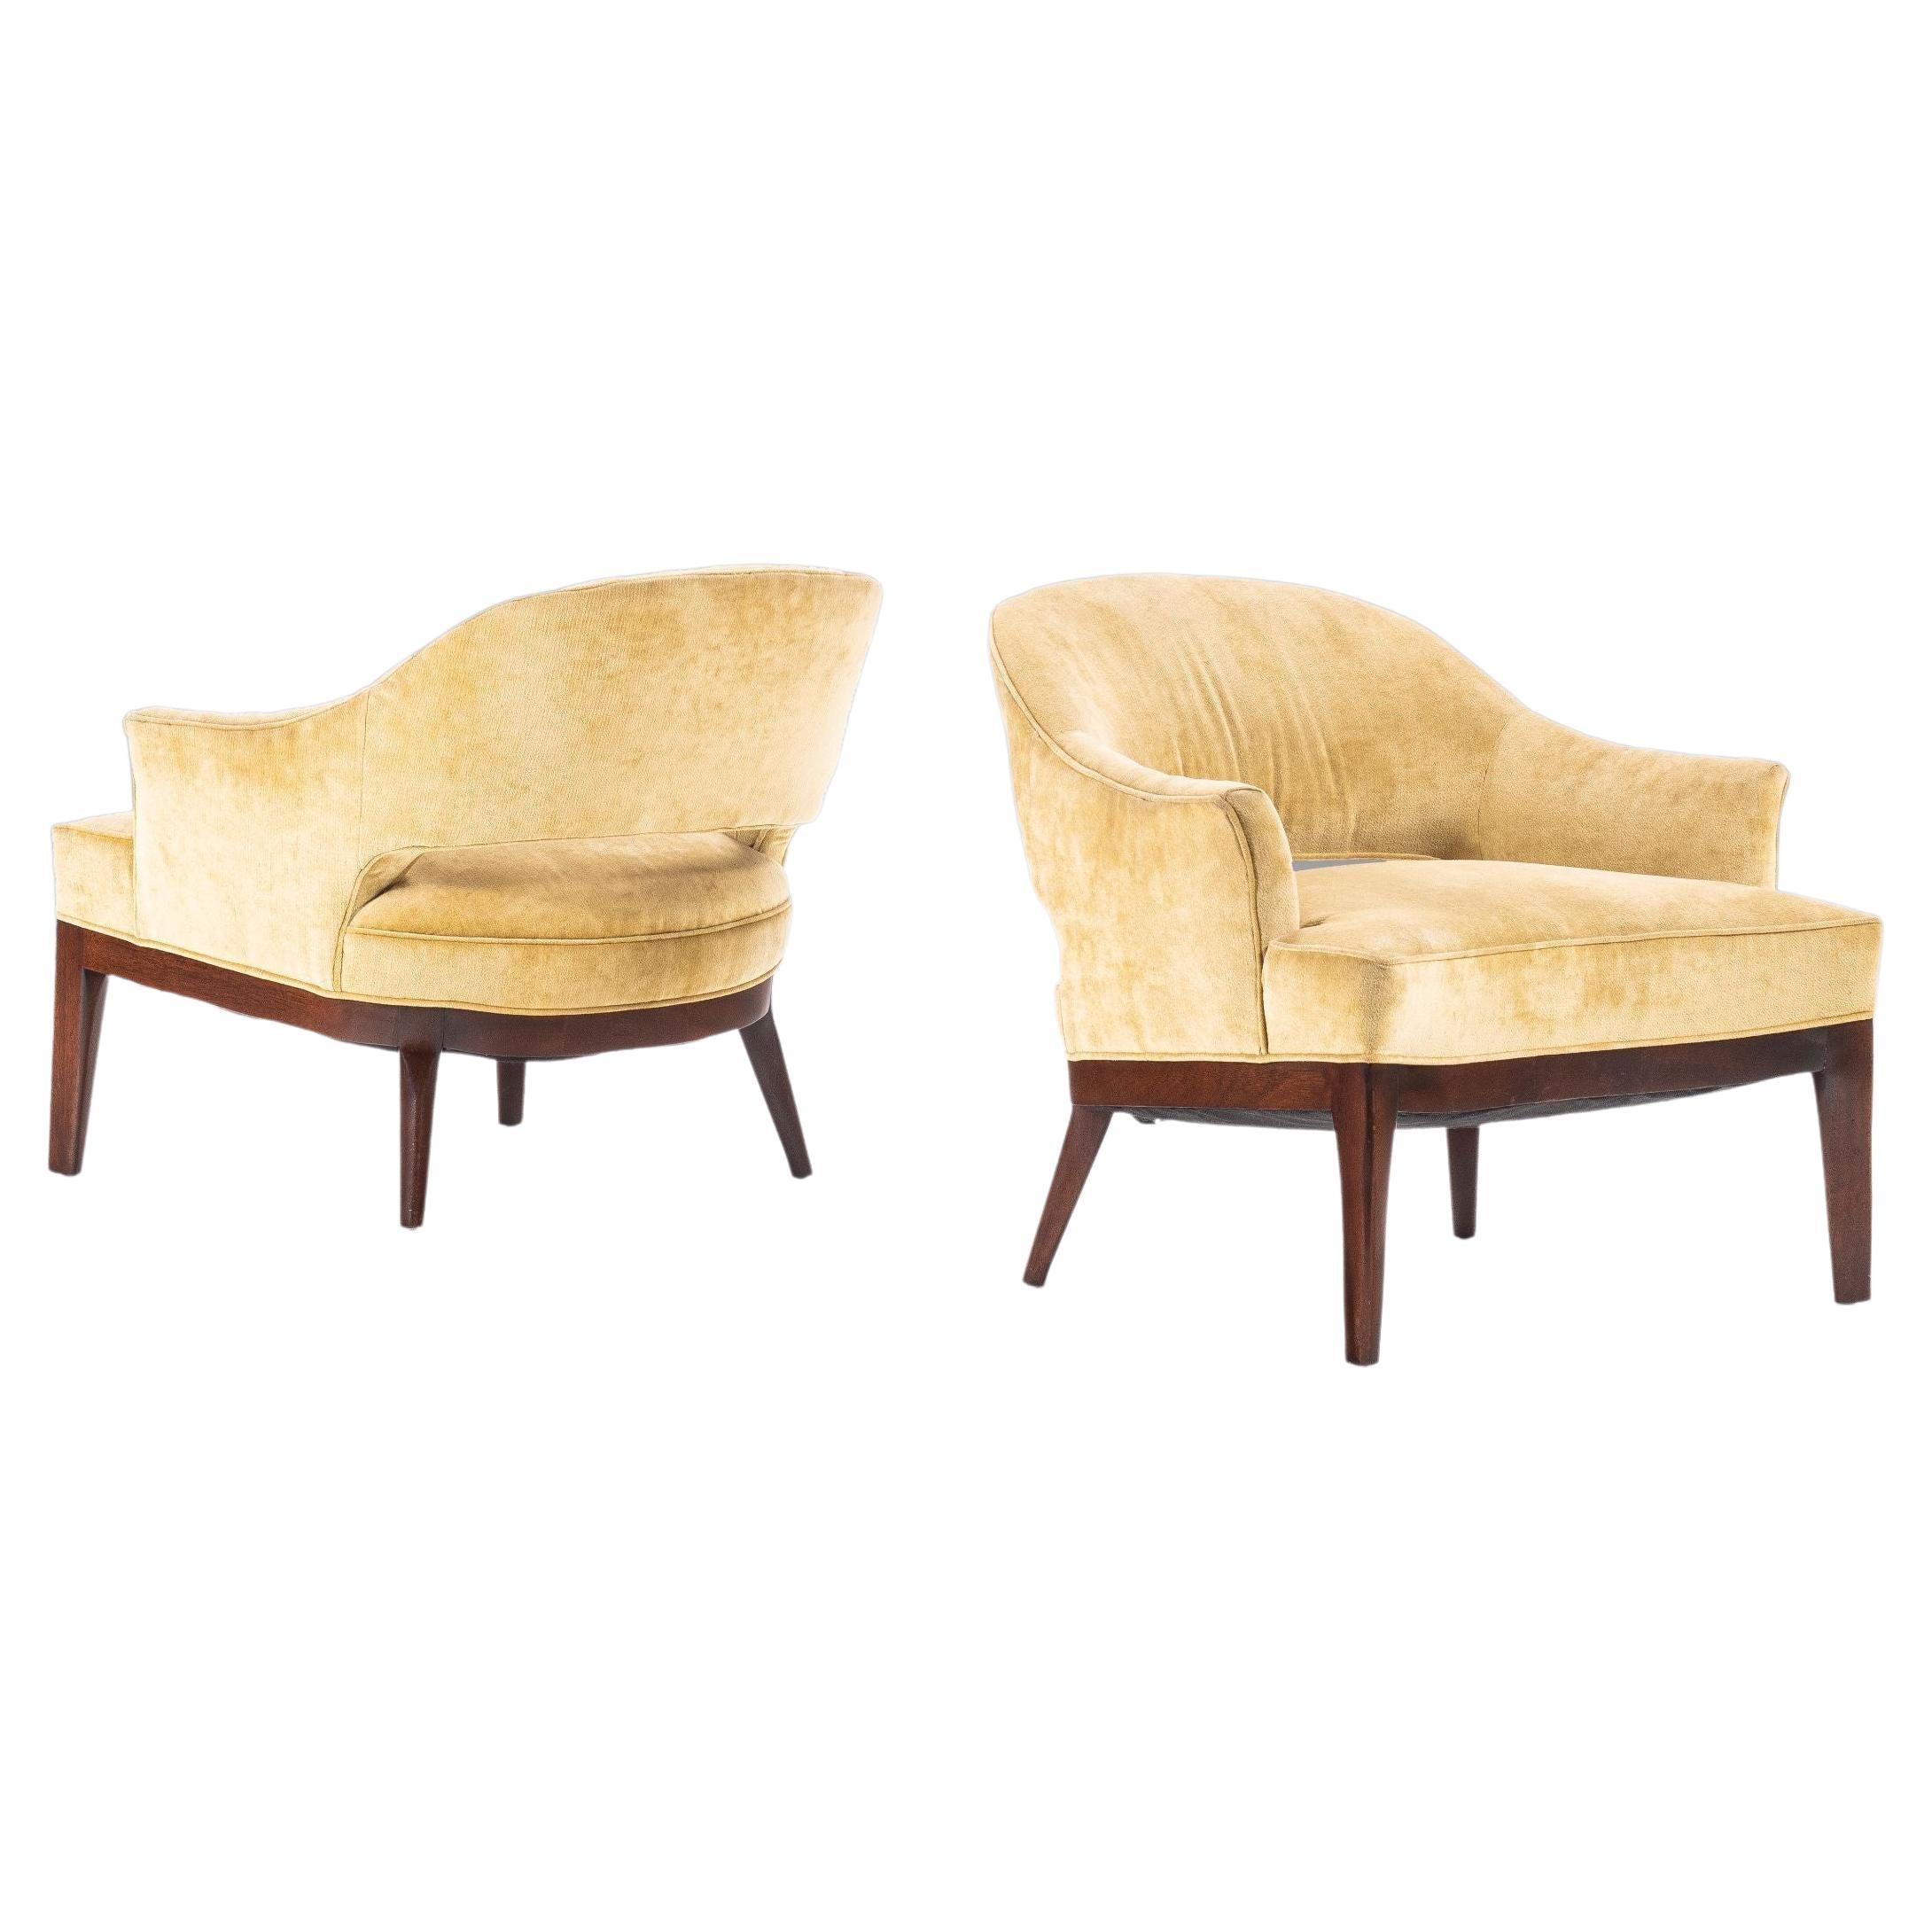 Set of Two '2' Saber-Leg Lounge Chairs Attributed to Harvey Probber, USA, 1960's